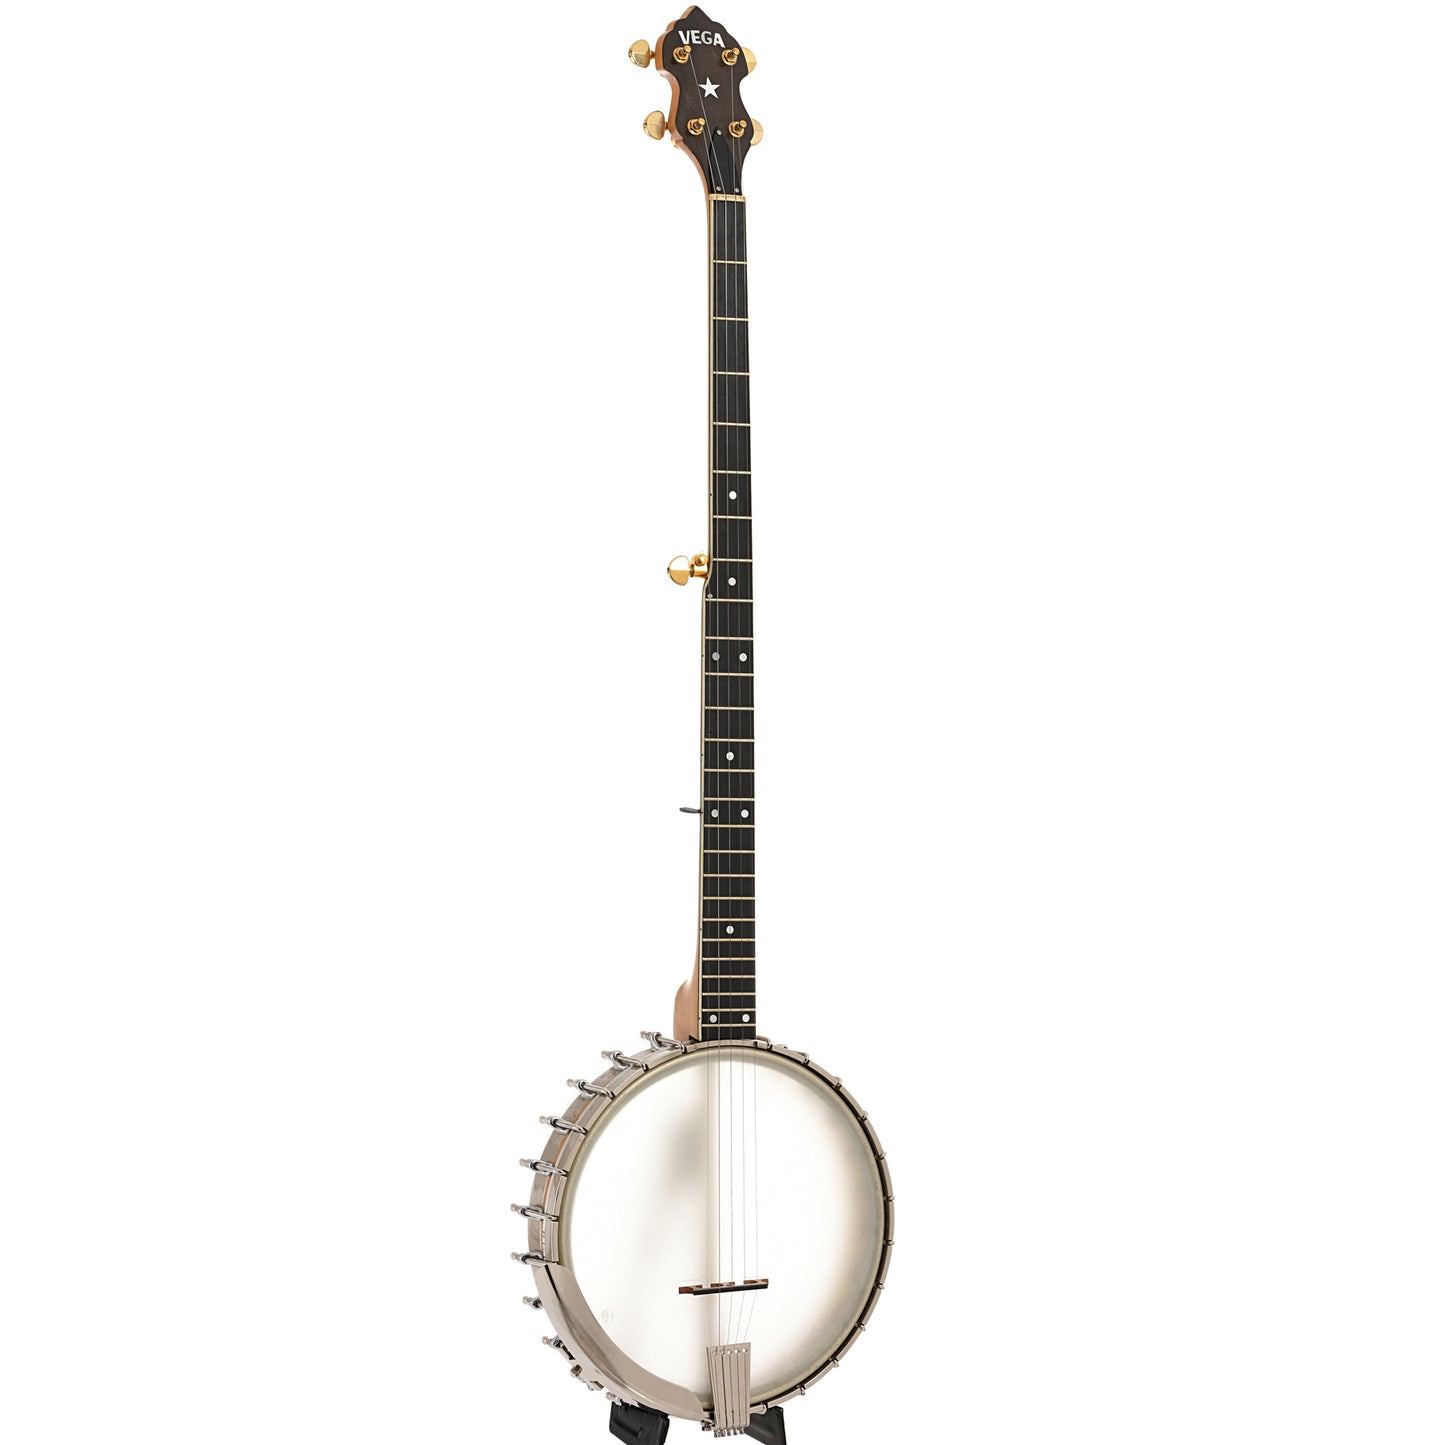 Full front and side of Vega Pete Seeger Extra Long Neck Banjo